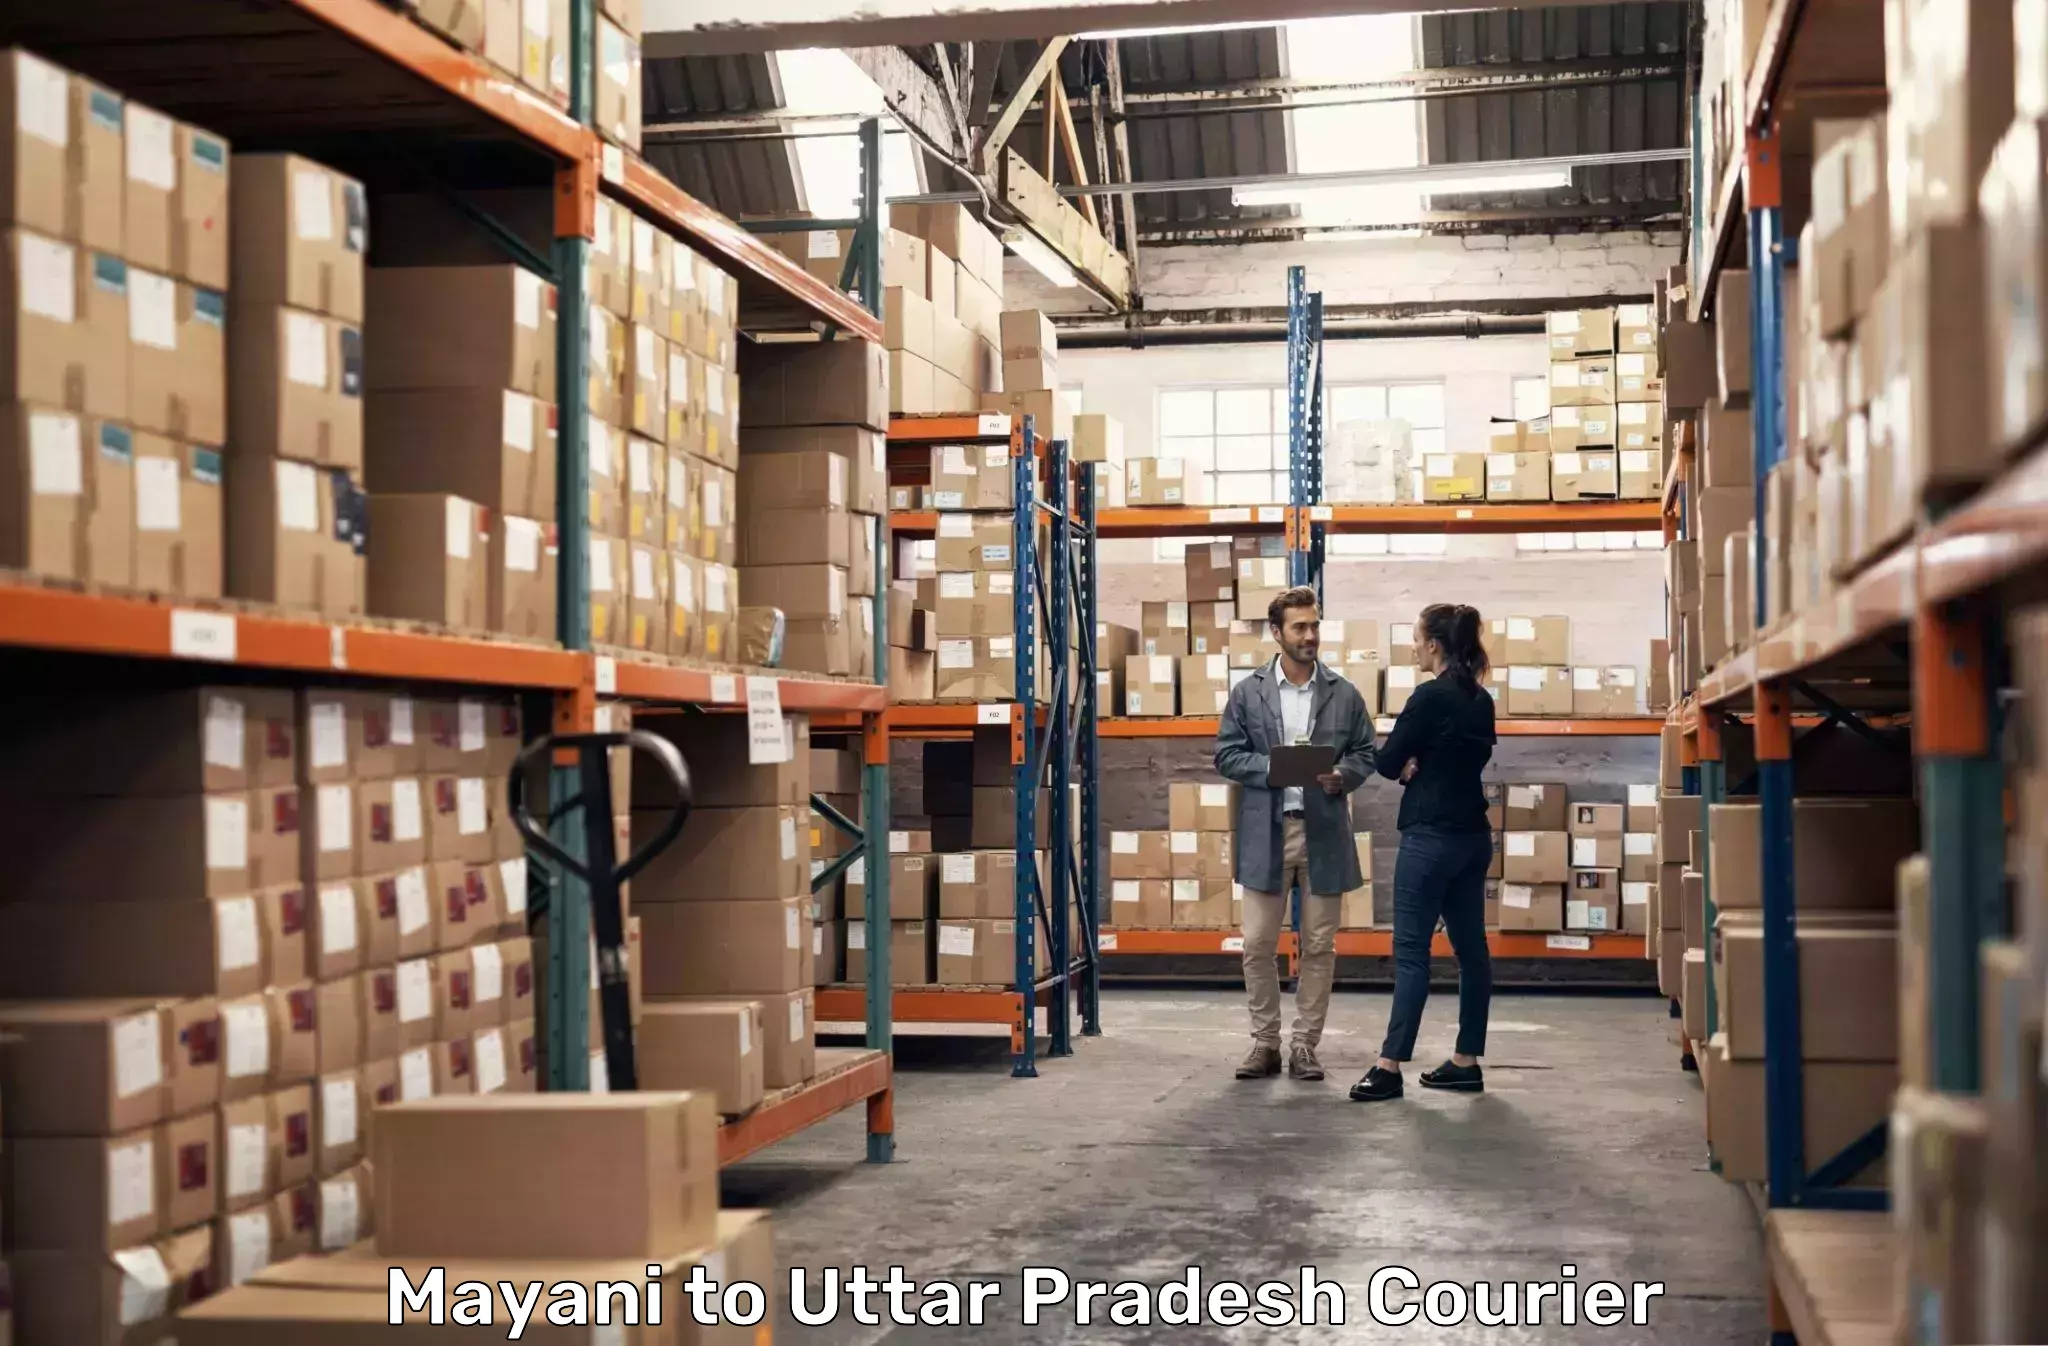 Courier service efficiency Mayani to Salemgarh